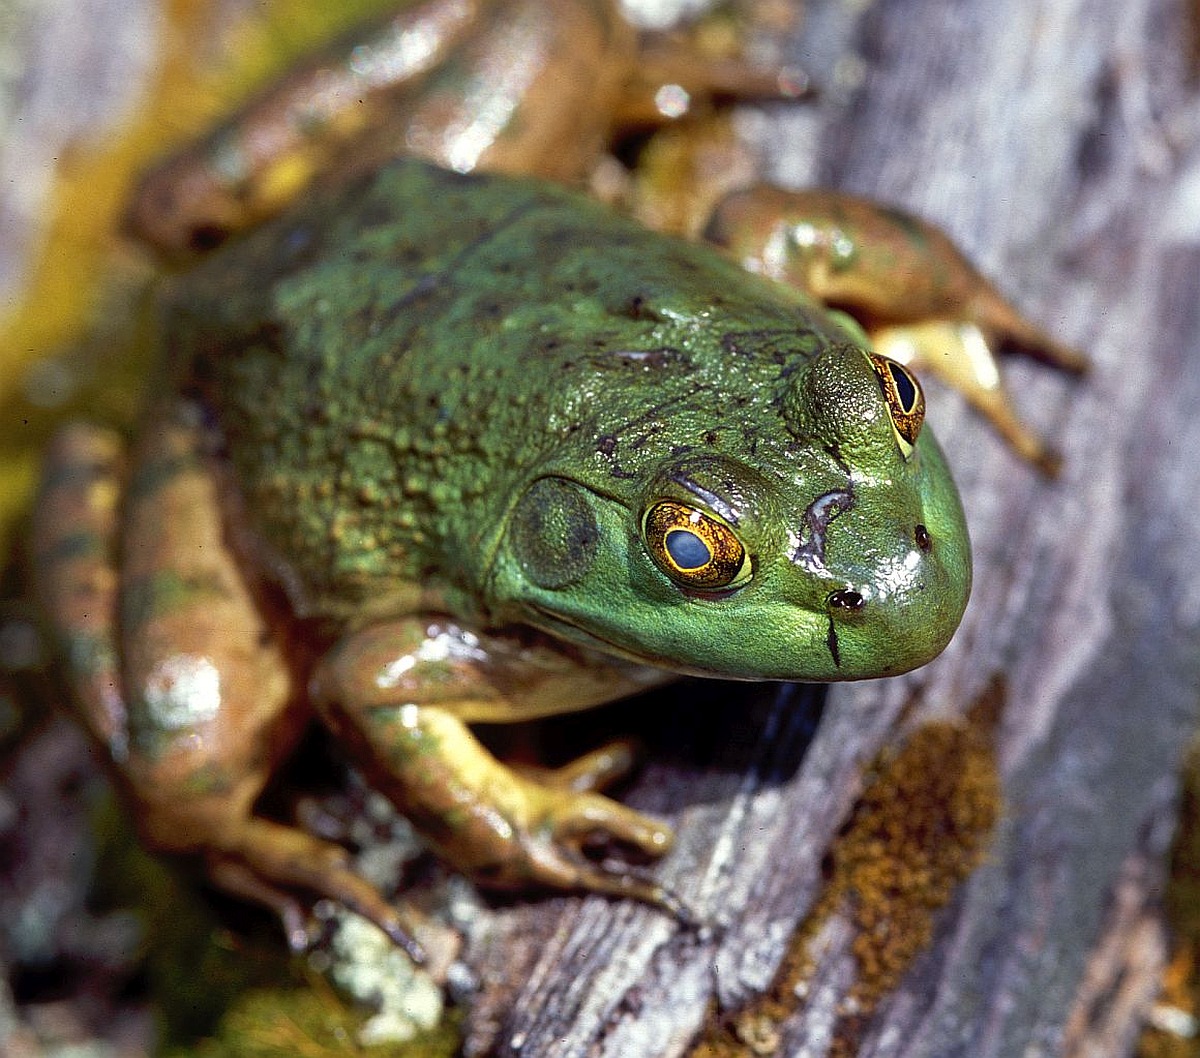 A close-up of a green-colored frog with brownish-colored legs on a log